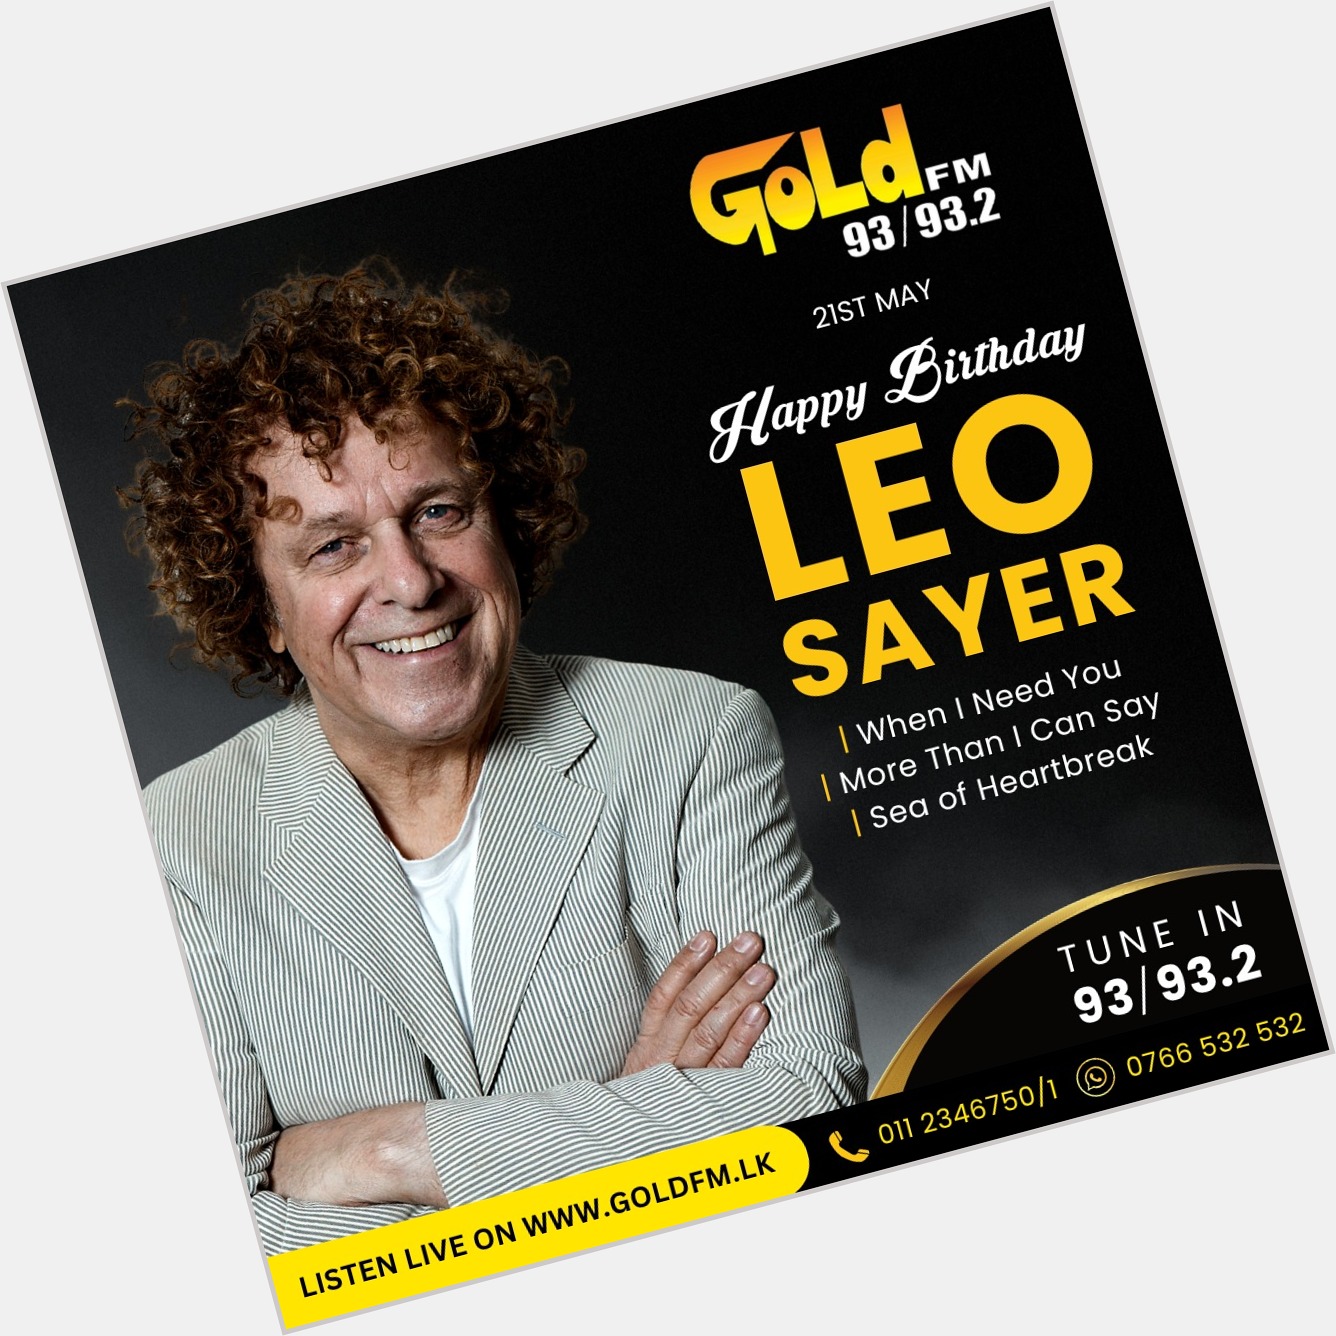 HAPPY BIRTHDAY TO LEO SAYER TUNE IN NOW 93 / 93.2 Island wide     